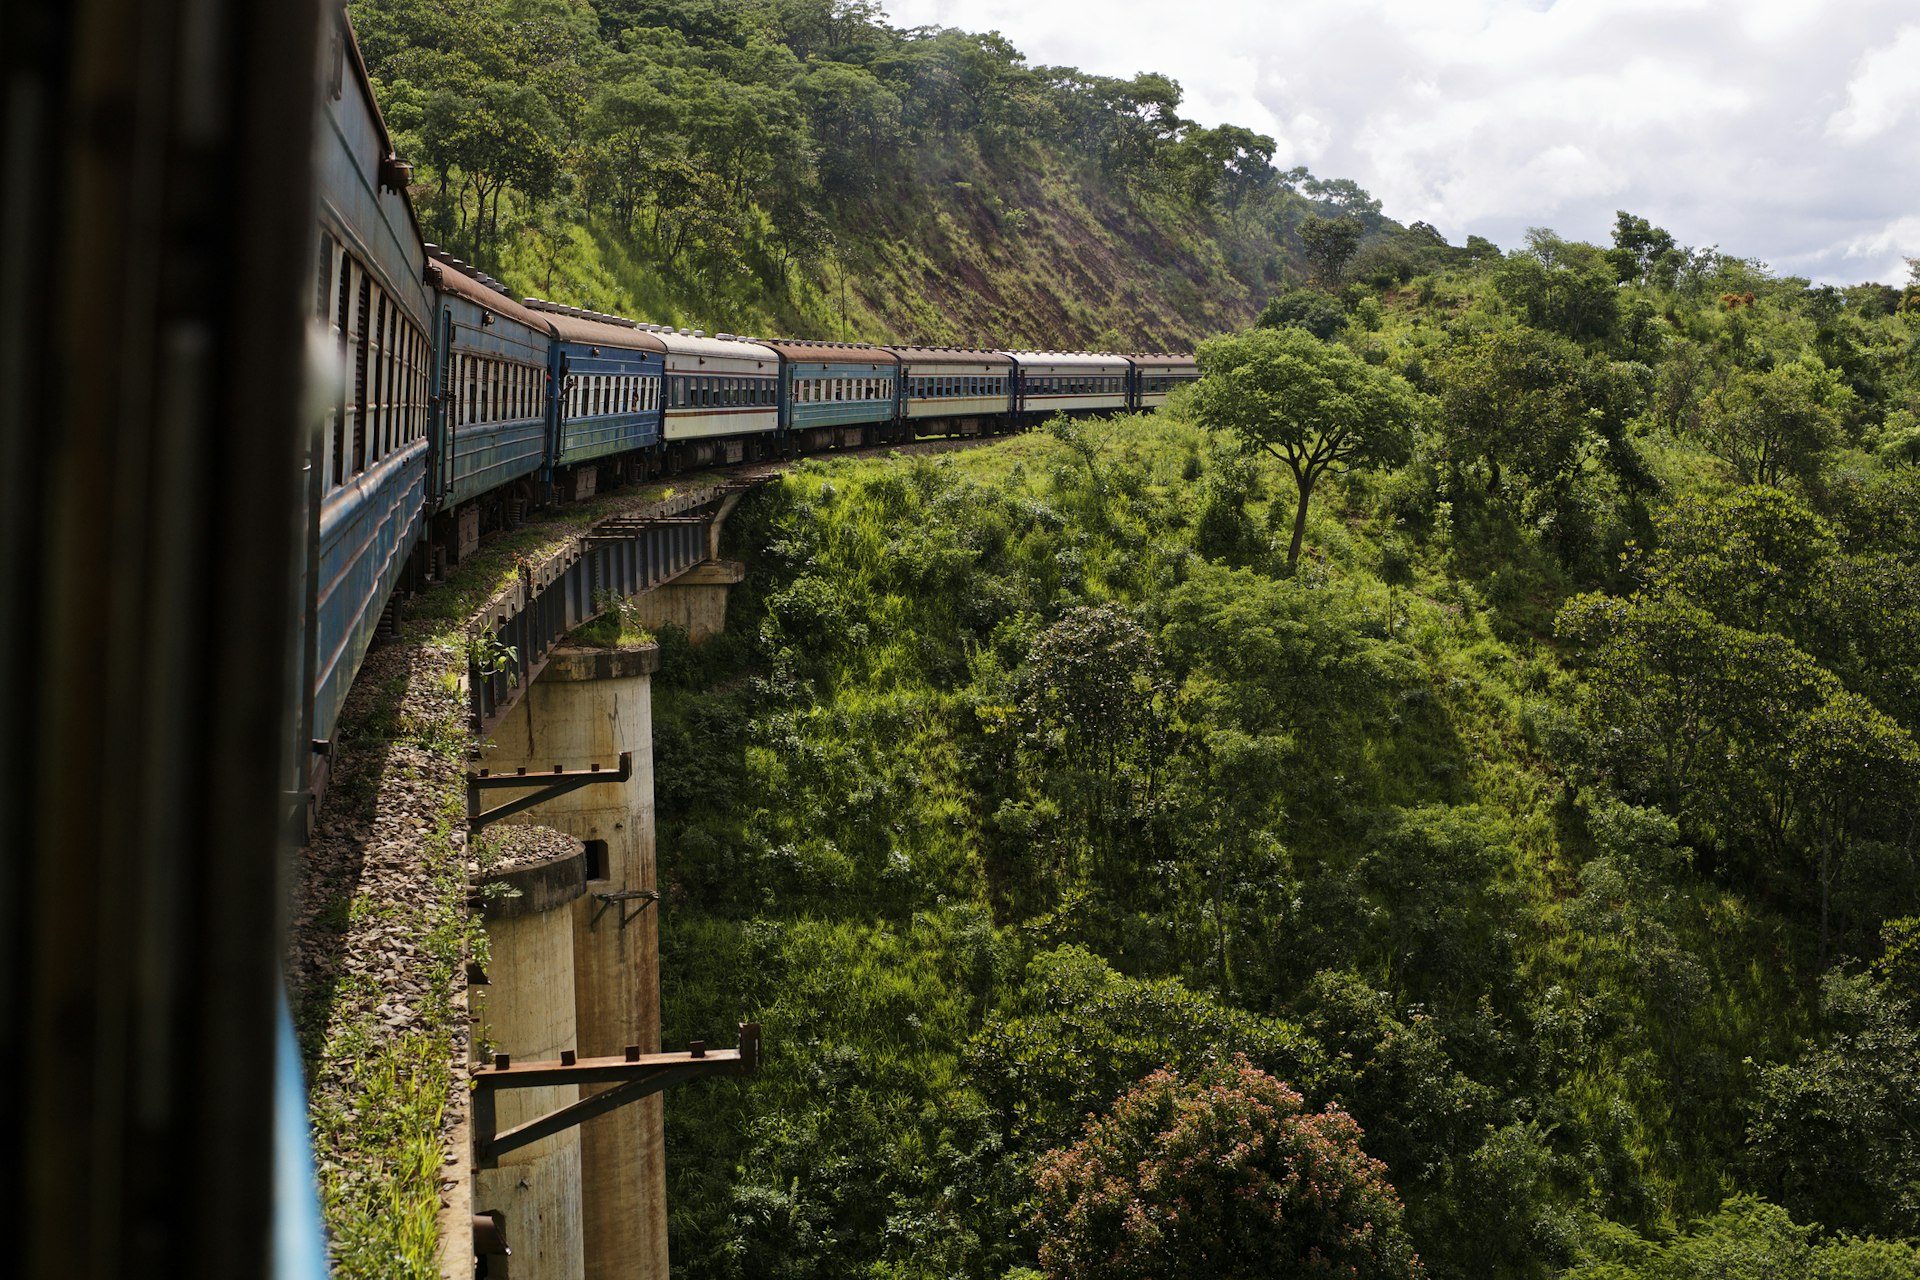 A photo of the Tazara train climbing the Great Rift Valley escarpment, Zambia as seen from out of one of the windows with the train curling around the trainline